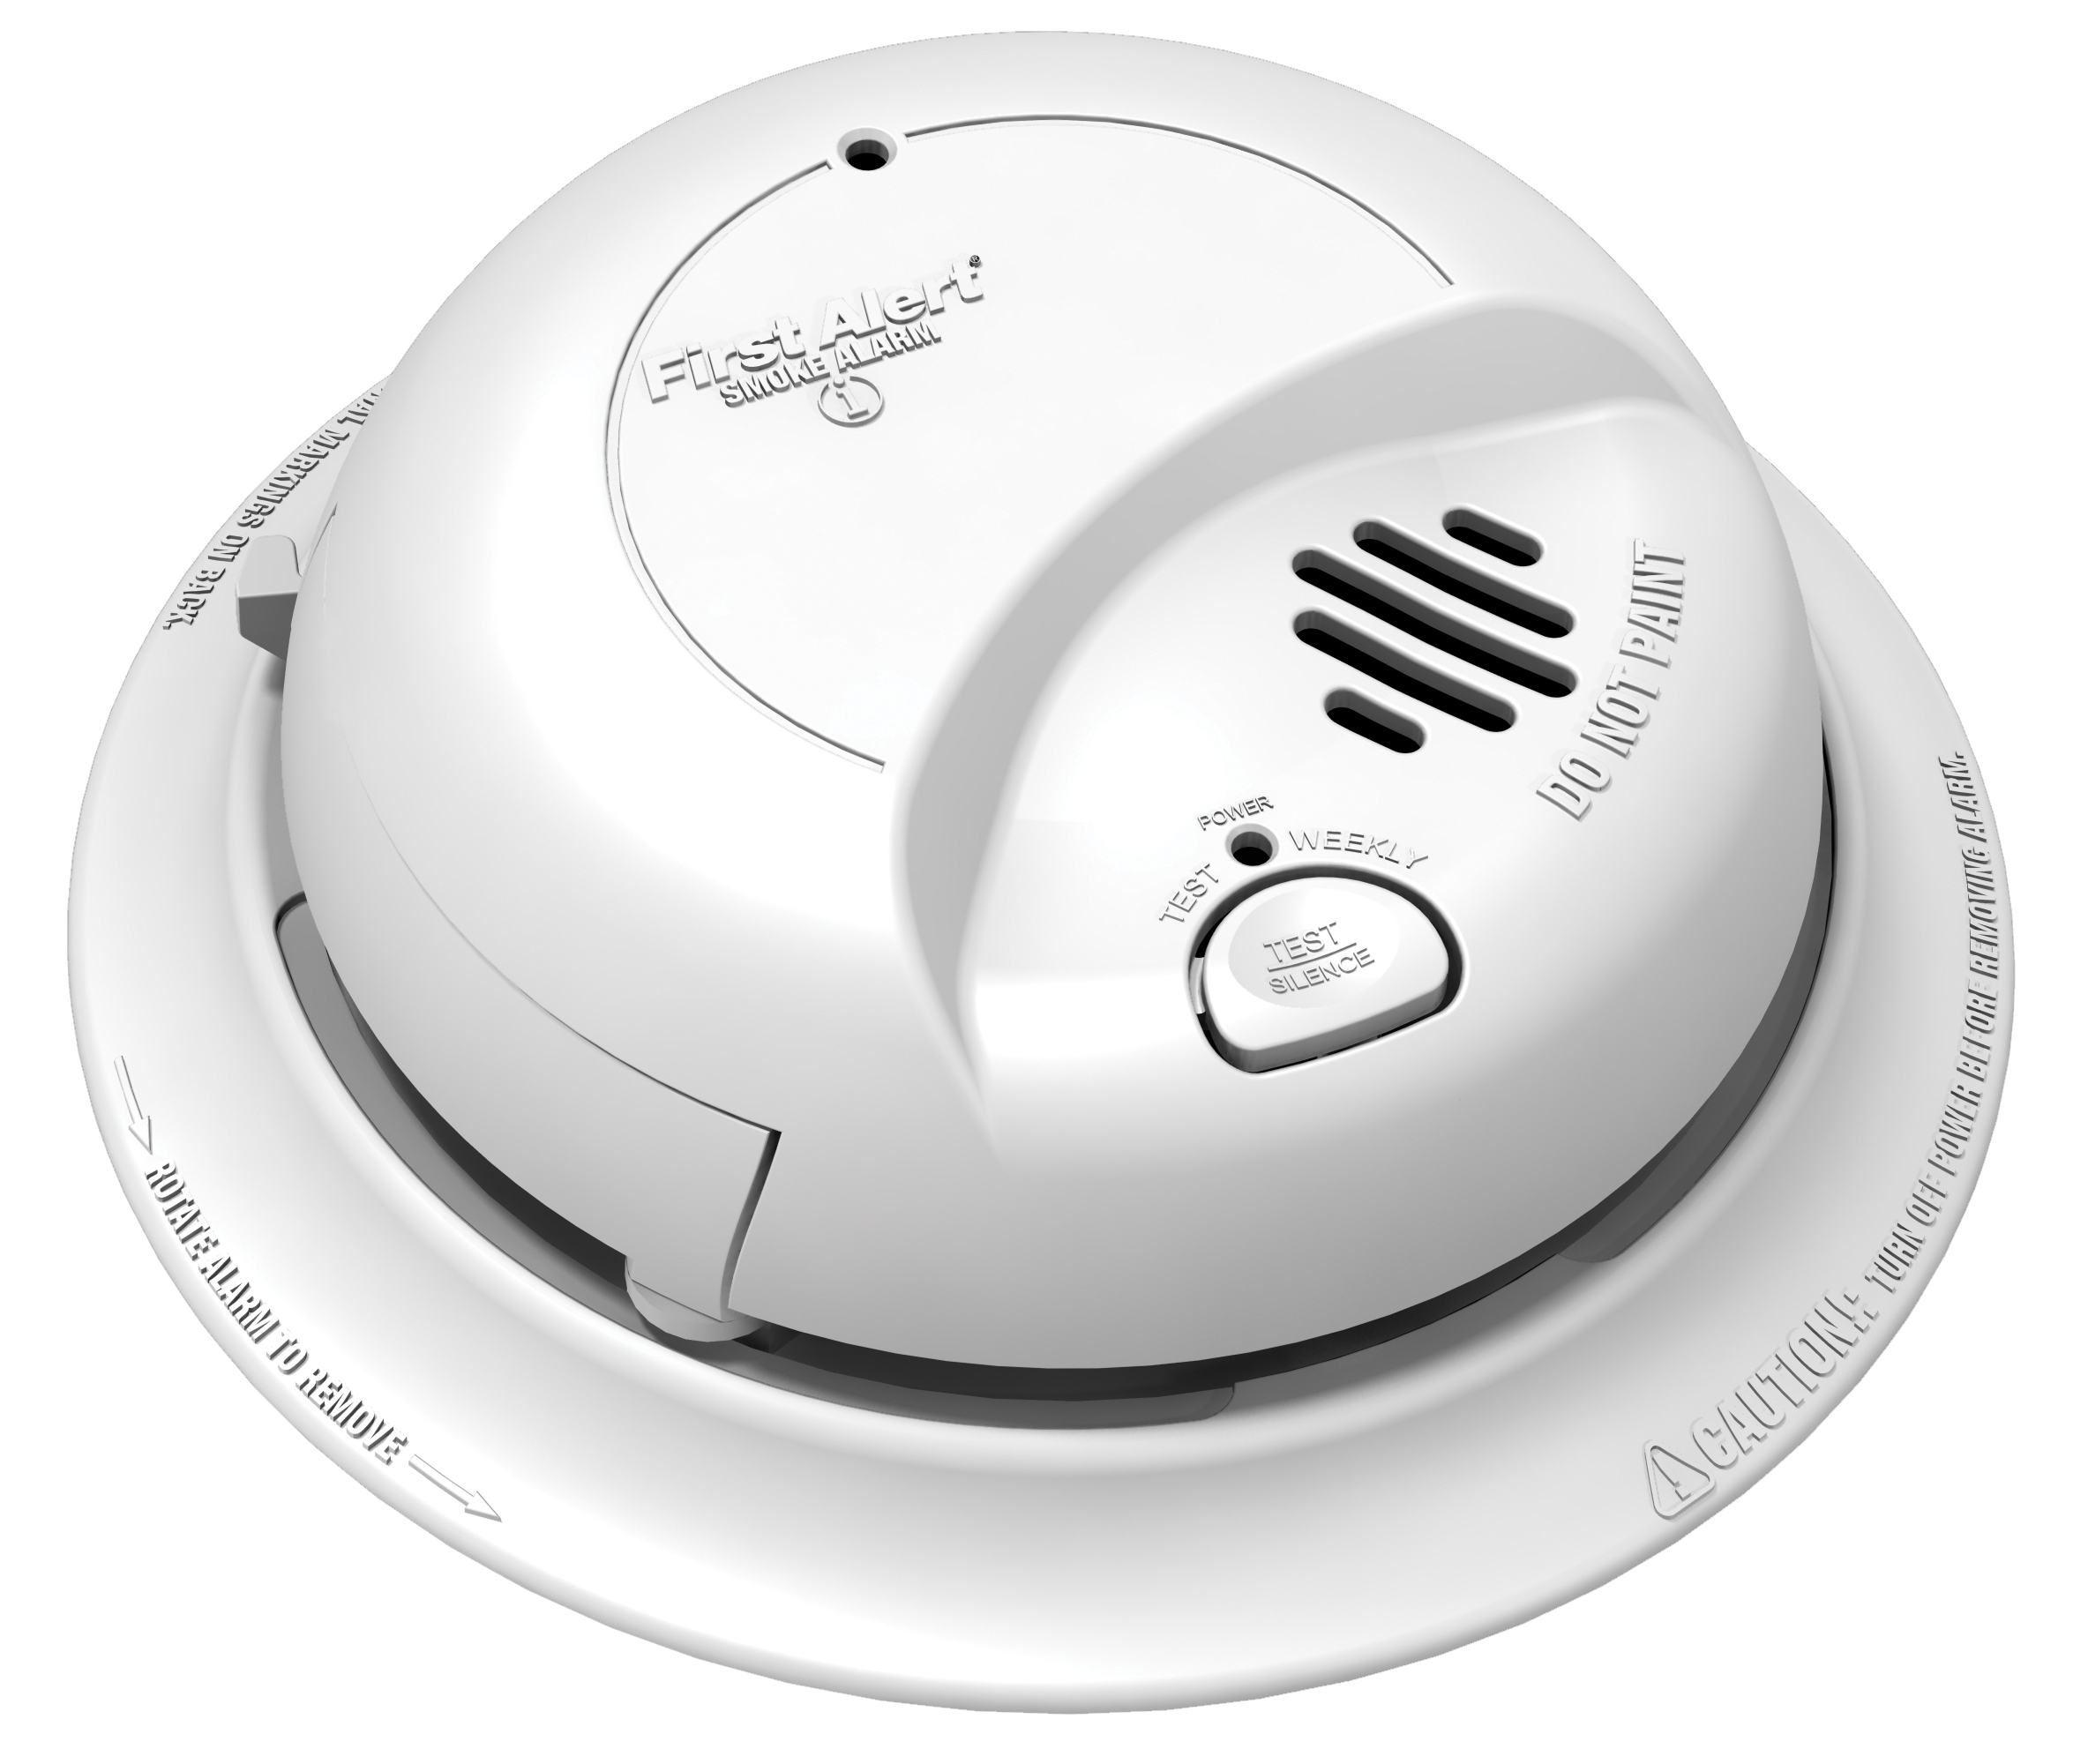 The 9120 Series smoke alarms have been designed to install faster, perform better and be even smarter than before. These improvements help reduce nuisance alarms and save you time and money. This is an alkaline battery version.